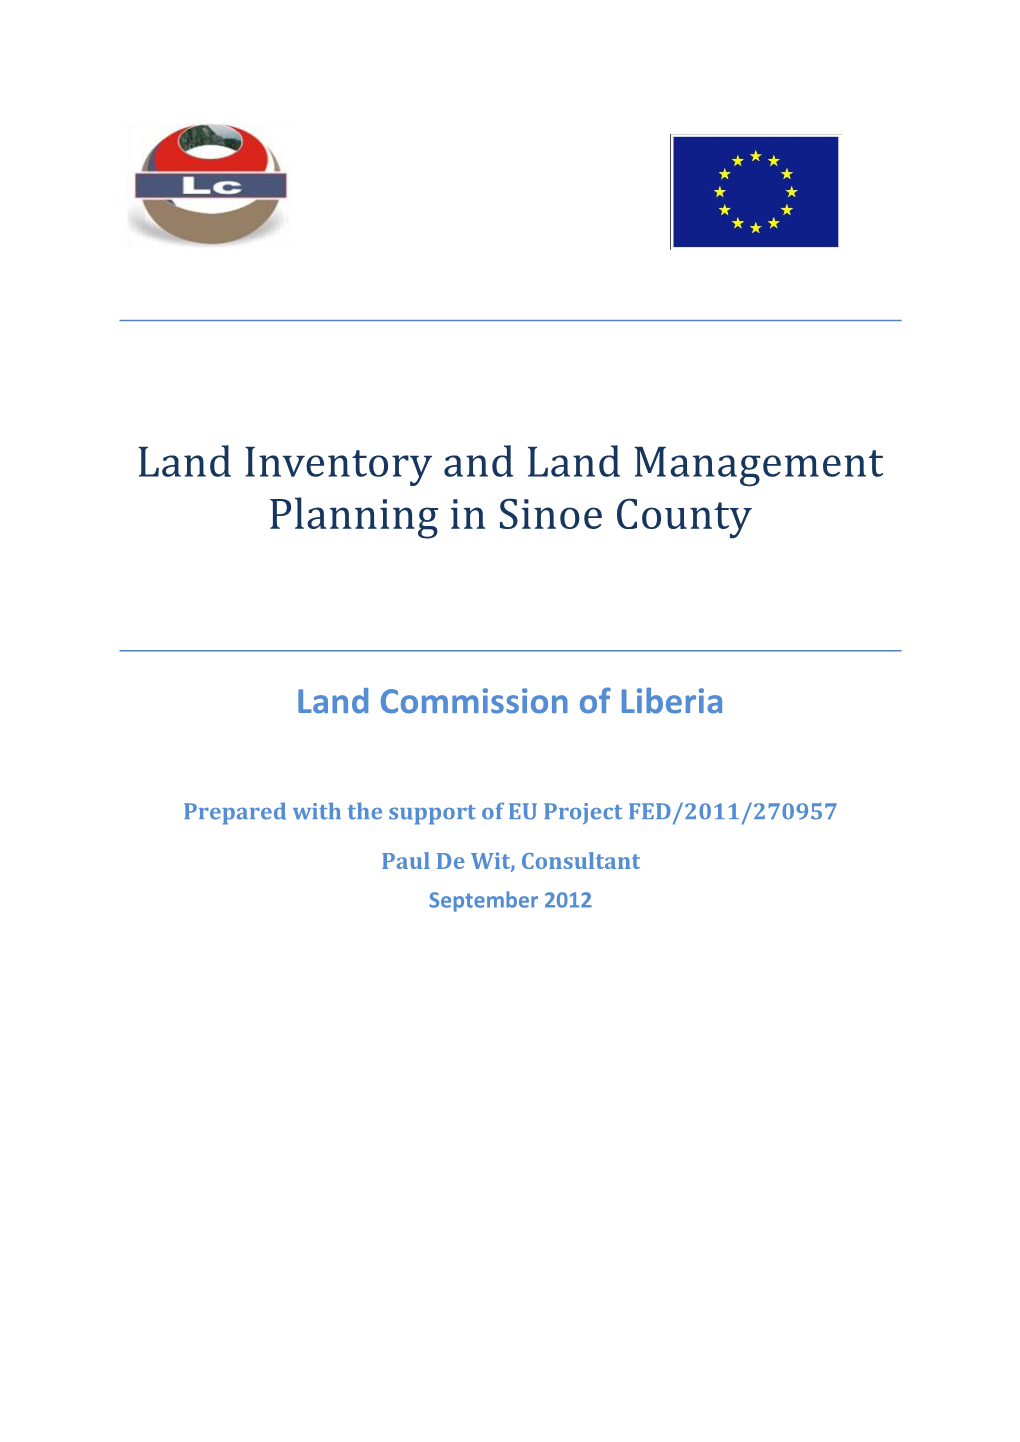 Land Inventory and Land Management Planning in Sinoe County